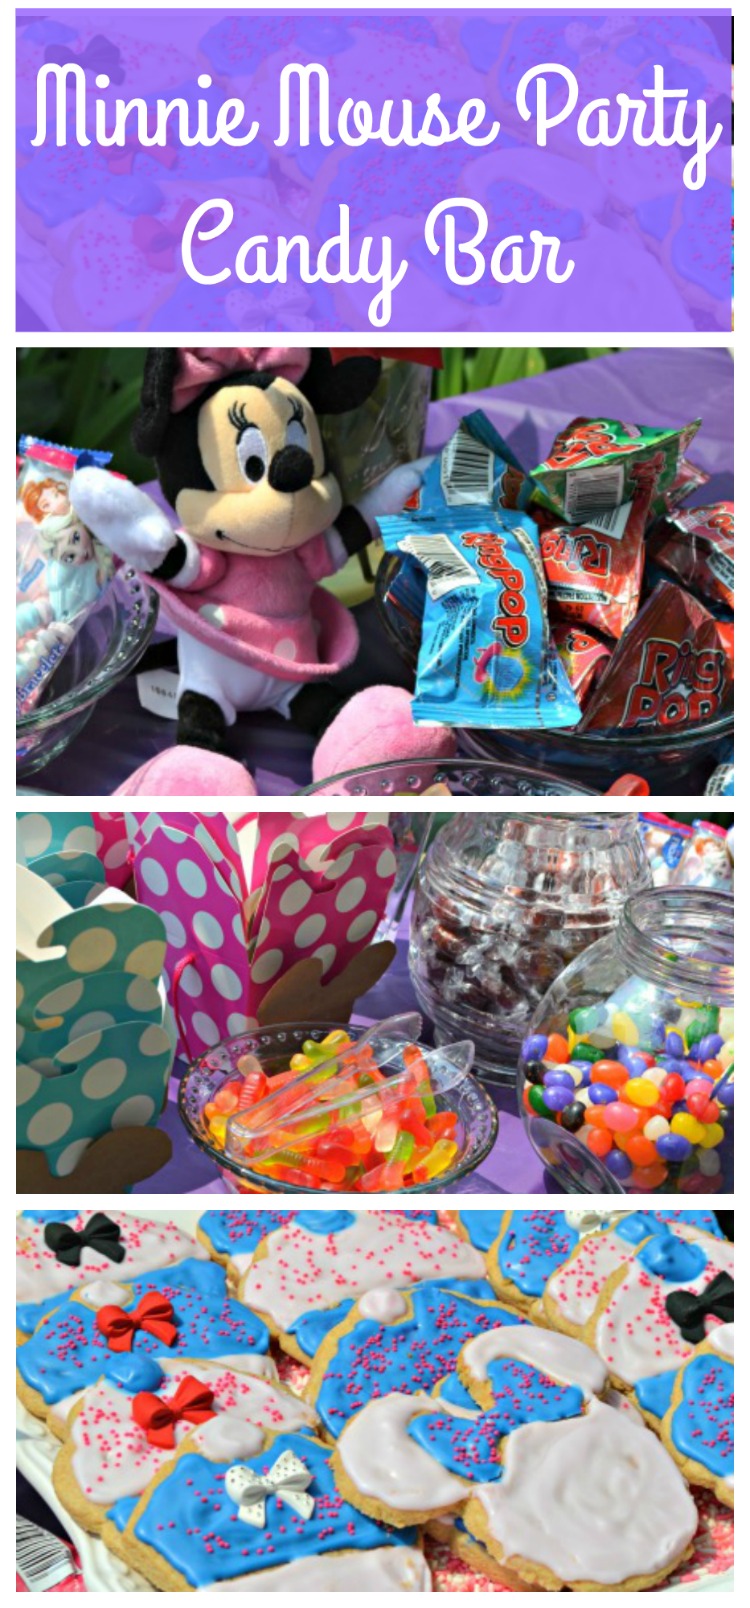 Minnie Mouse party candy bar